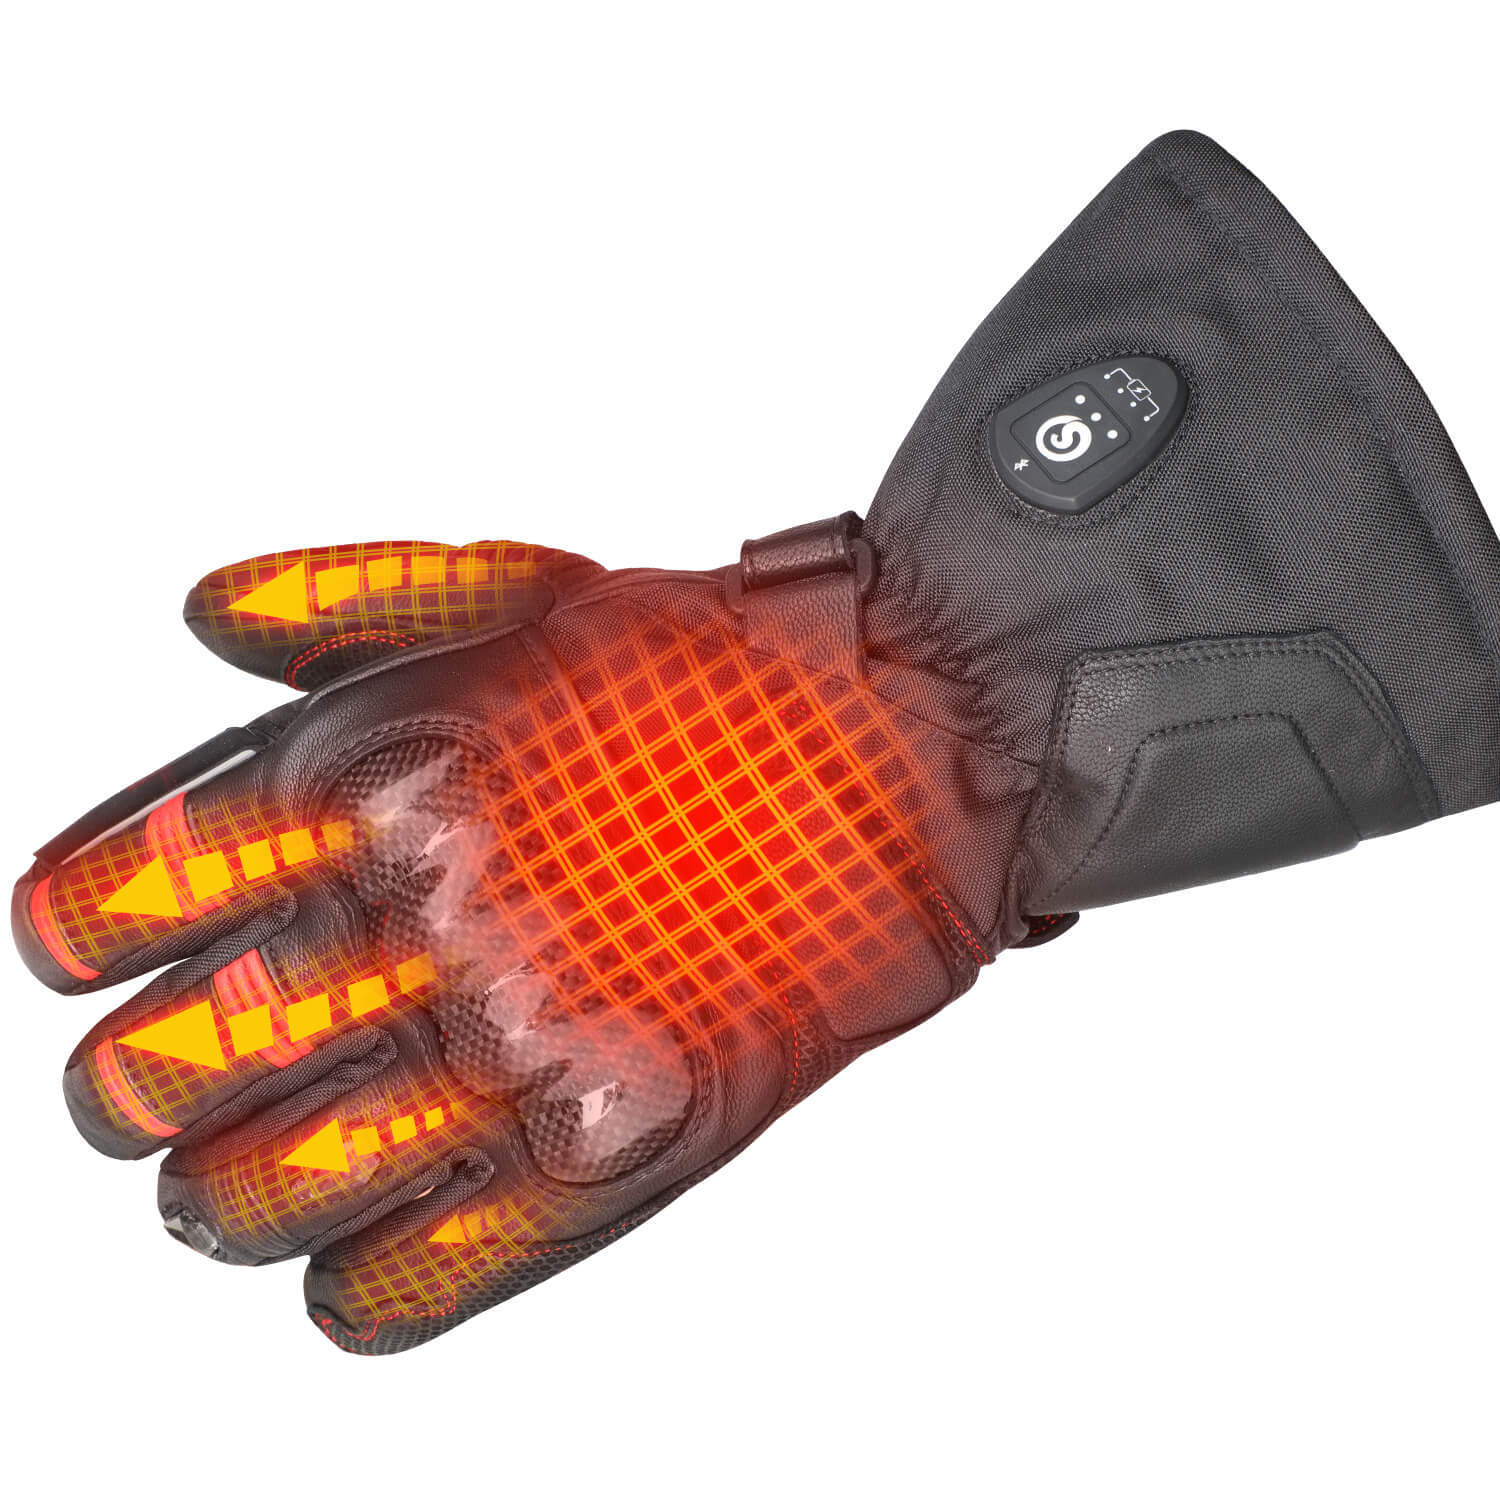 Savior Bluetooth Battery Powered Heated Motorcycle Gloves